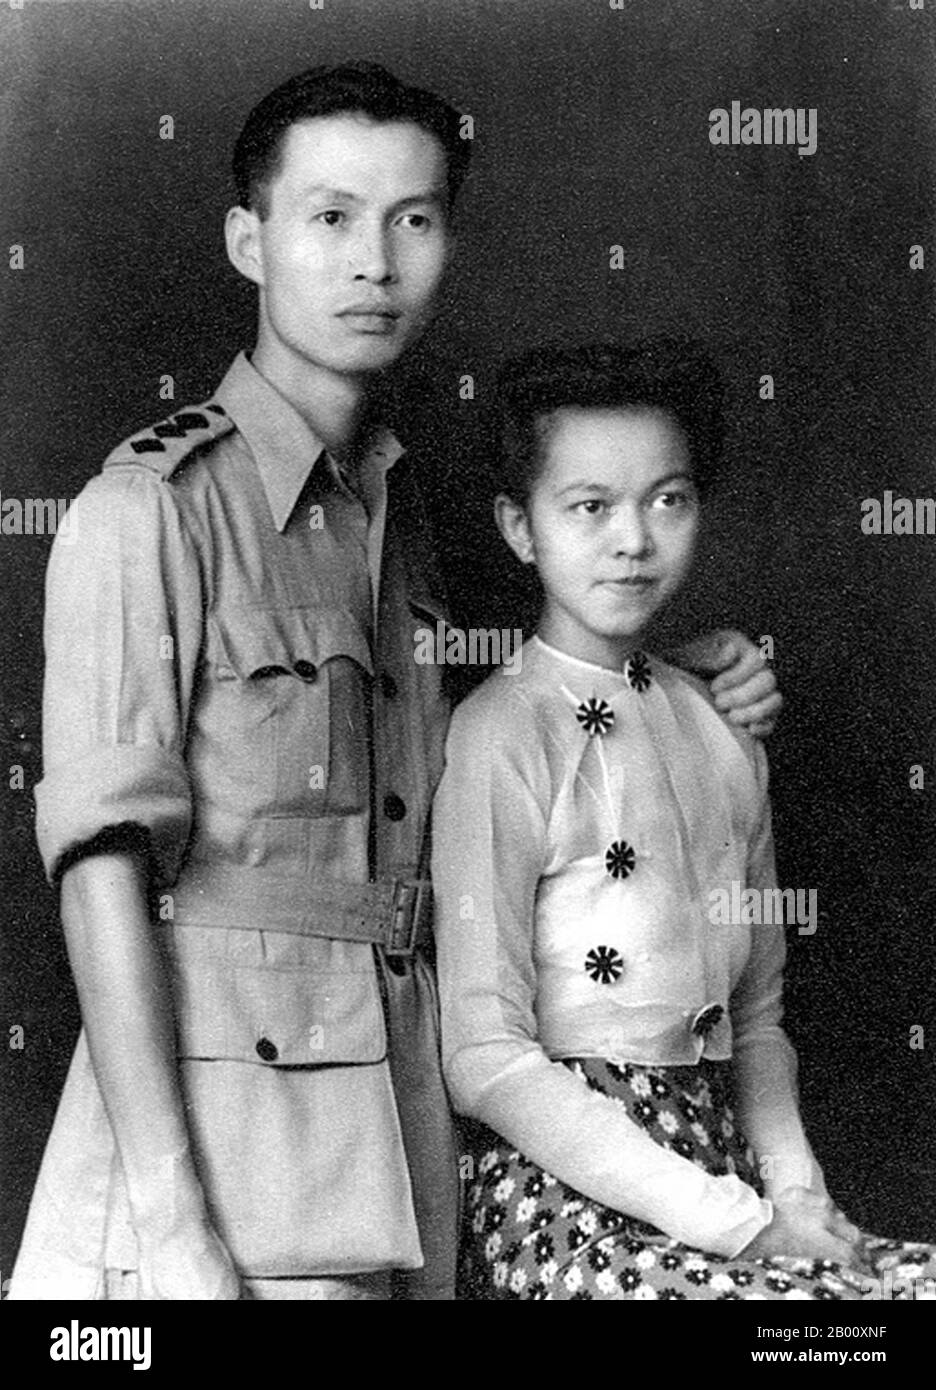 Burma/Myanmar: Daw Mi Mi Khaing (1916-1990) with her husband Sao Saimong Mangrai  Mi Mi Khaing (1916 – 15 March 1990) was a Burmese scholar and writer who authored numerous books and articles on life in Burma during the 20th century. She is notable as one of the first women to write in English about Burmese culture and traditions. Born of Mon ancestry, Mi Mi Khaing grew up during the British colonial rule of Burma and was educated in British schools. She married Sao Saimong, a noted scholar and a member of the royal family of Kengtung in Shan State. Stock Photo